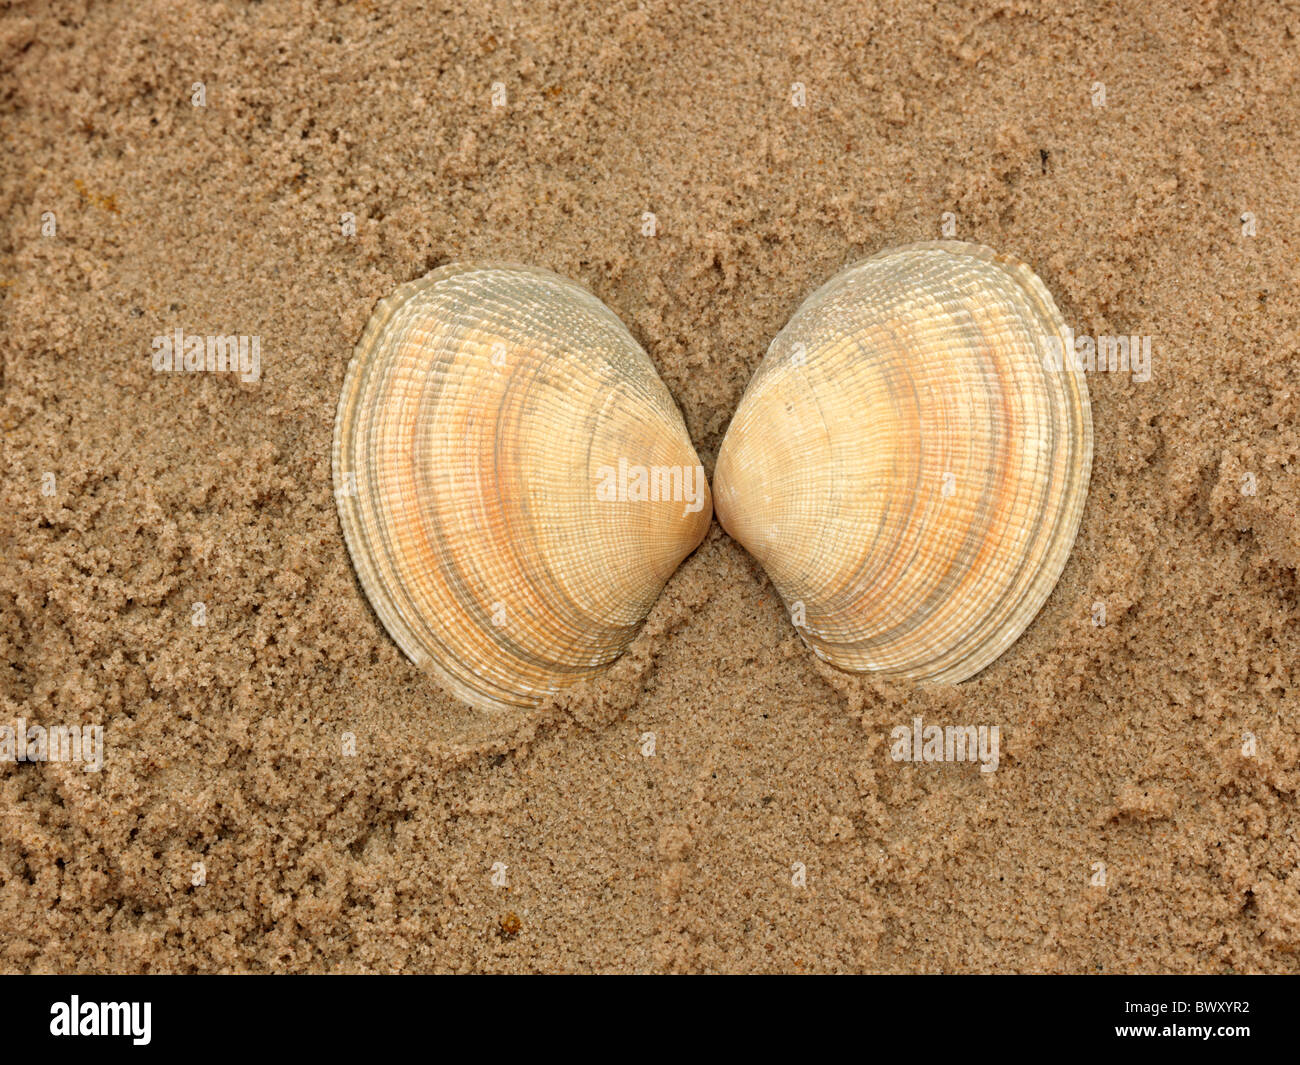 Two Cockle Shells On Sand Stock Photo